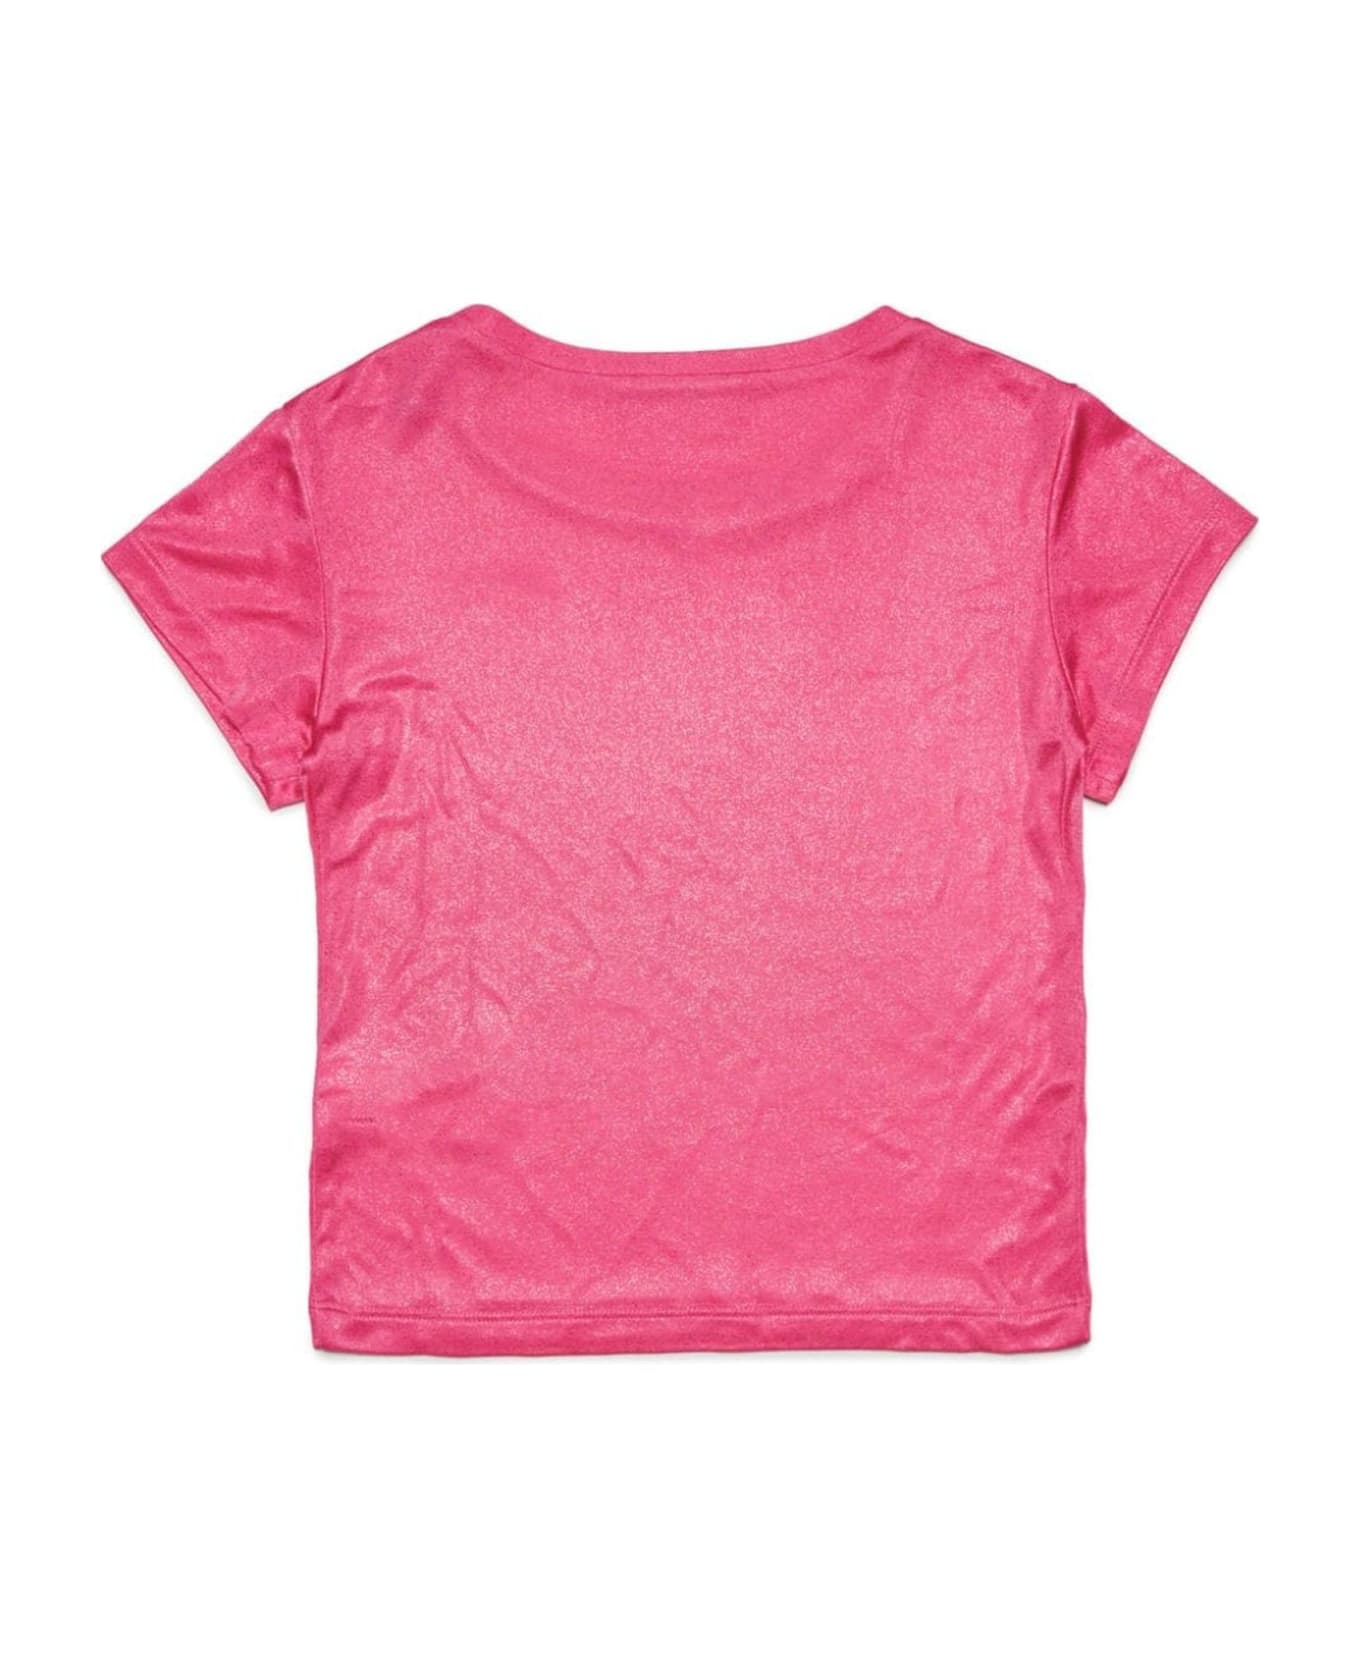 Diesel T-shirts And Polos Pink - Pink Tシャツ＆ポロシャツ